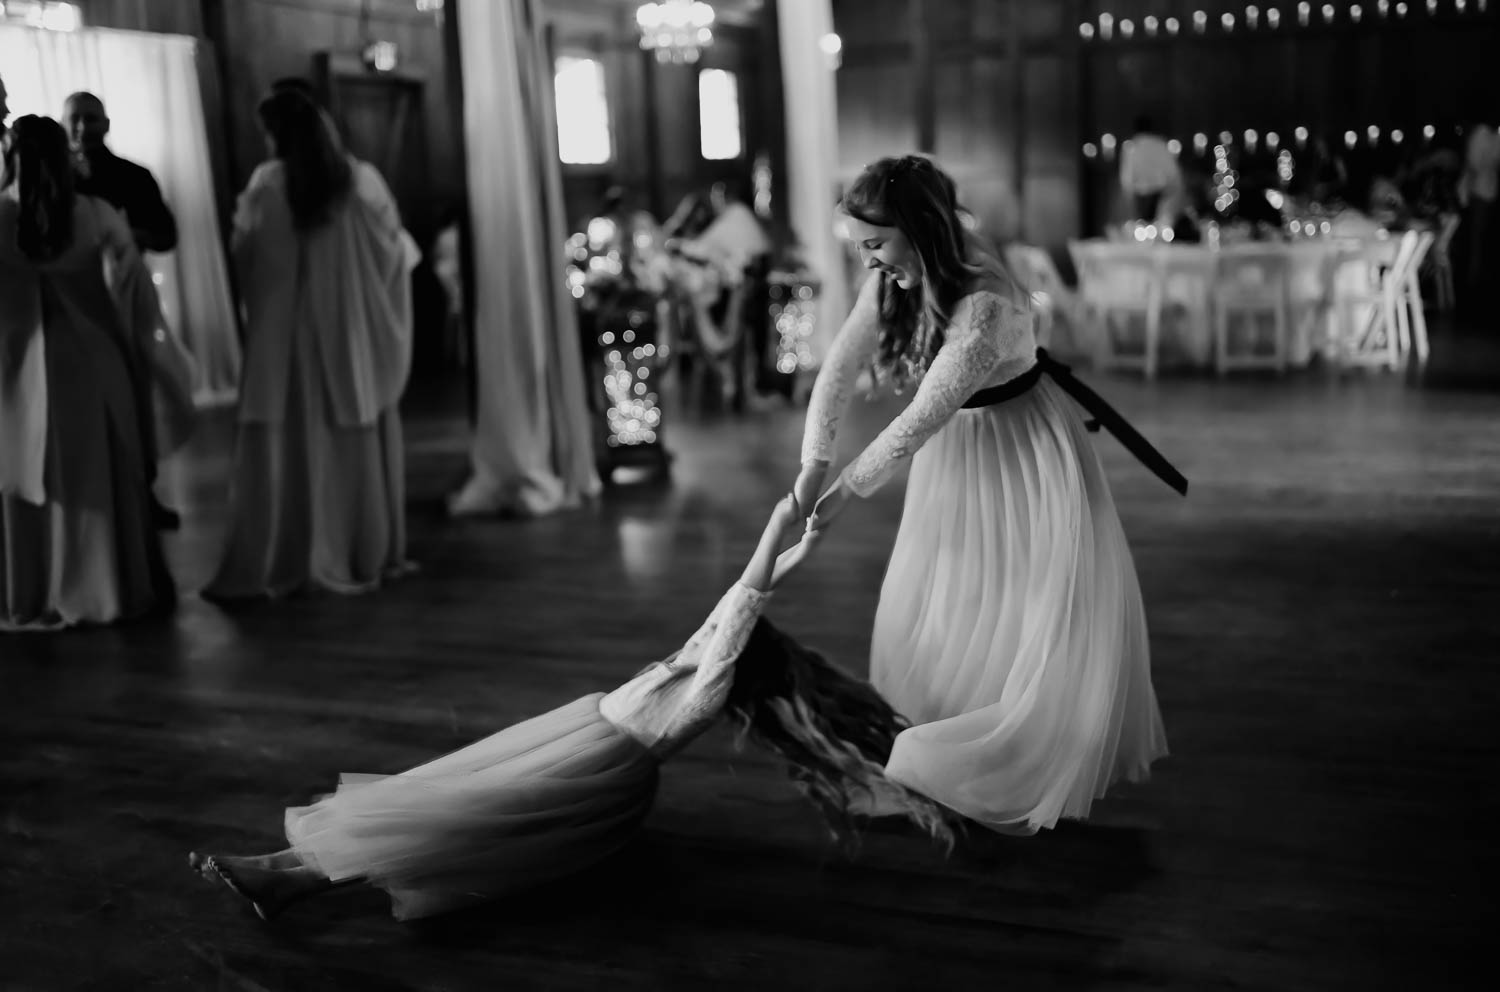 045 Eagle Dancer Ranch Boerne Hill Country Wedding+Reception Philip Thomas Photography